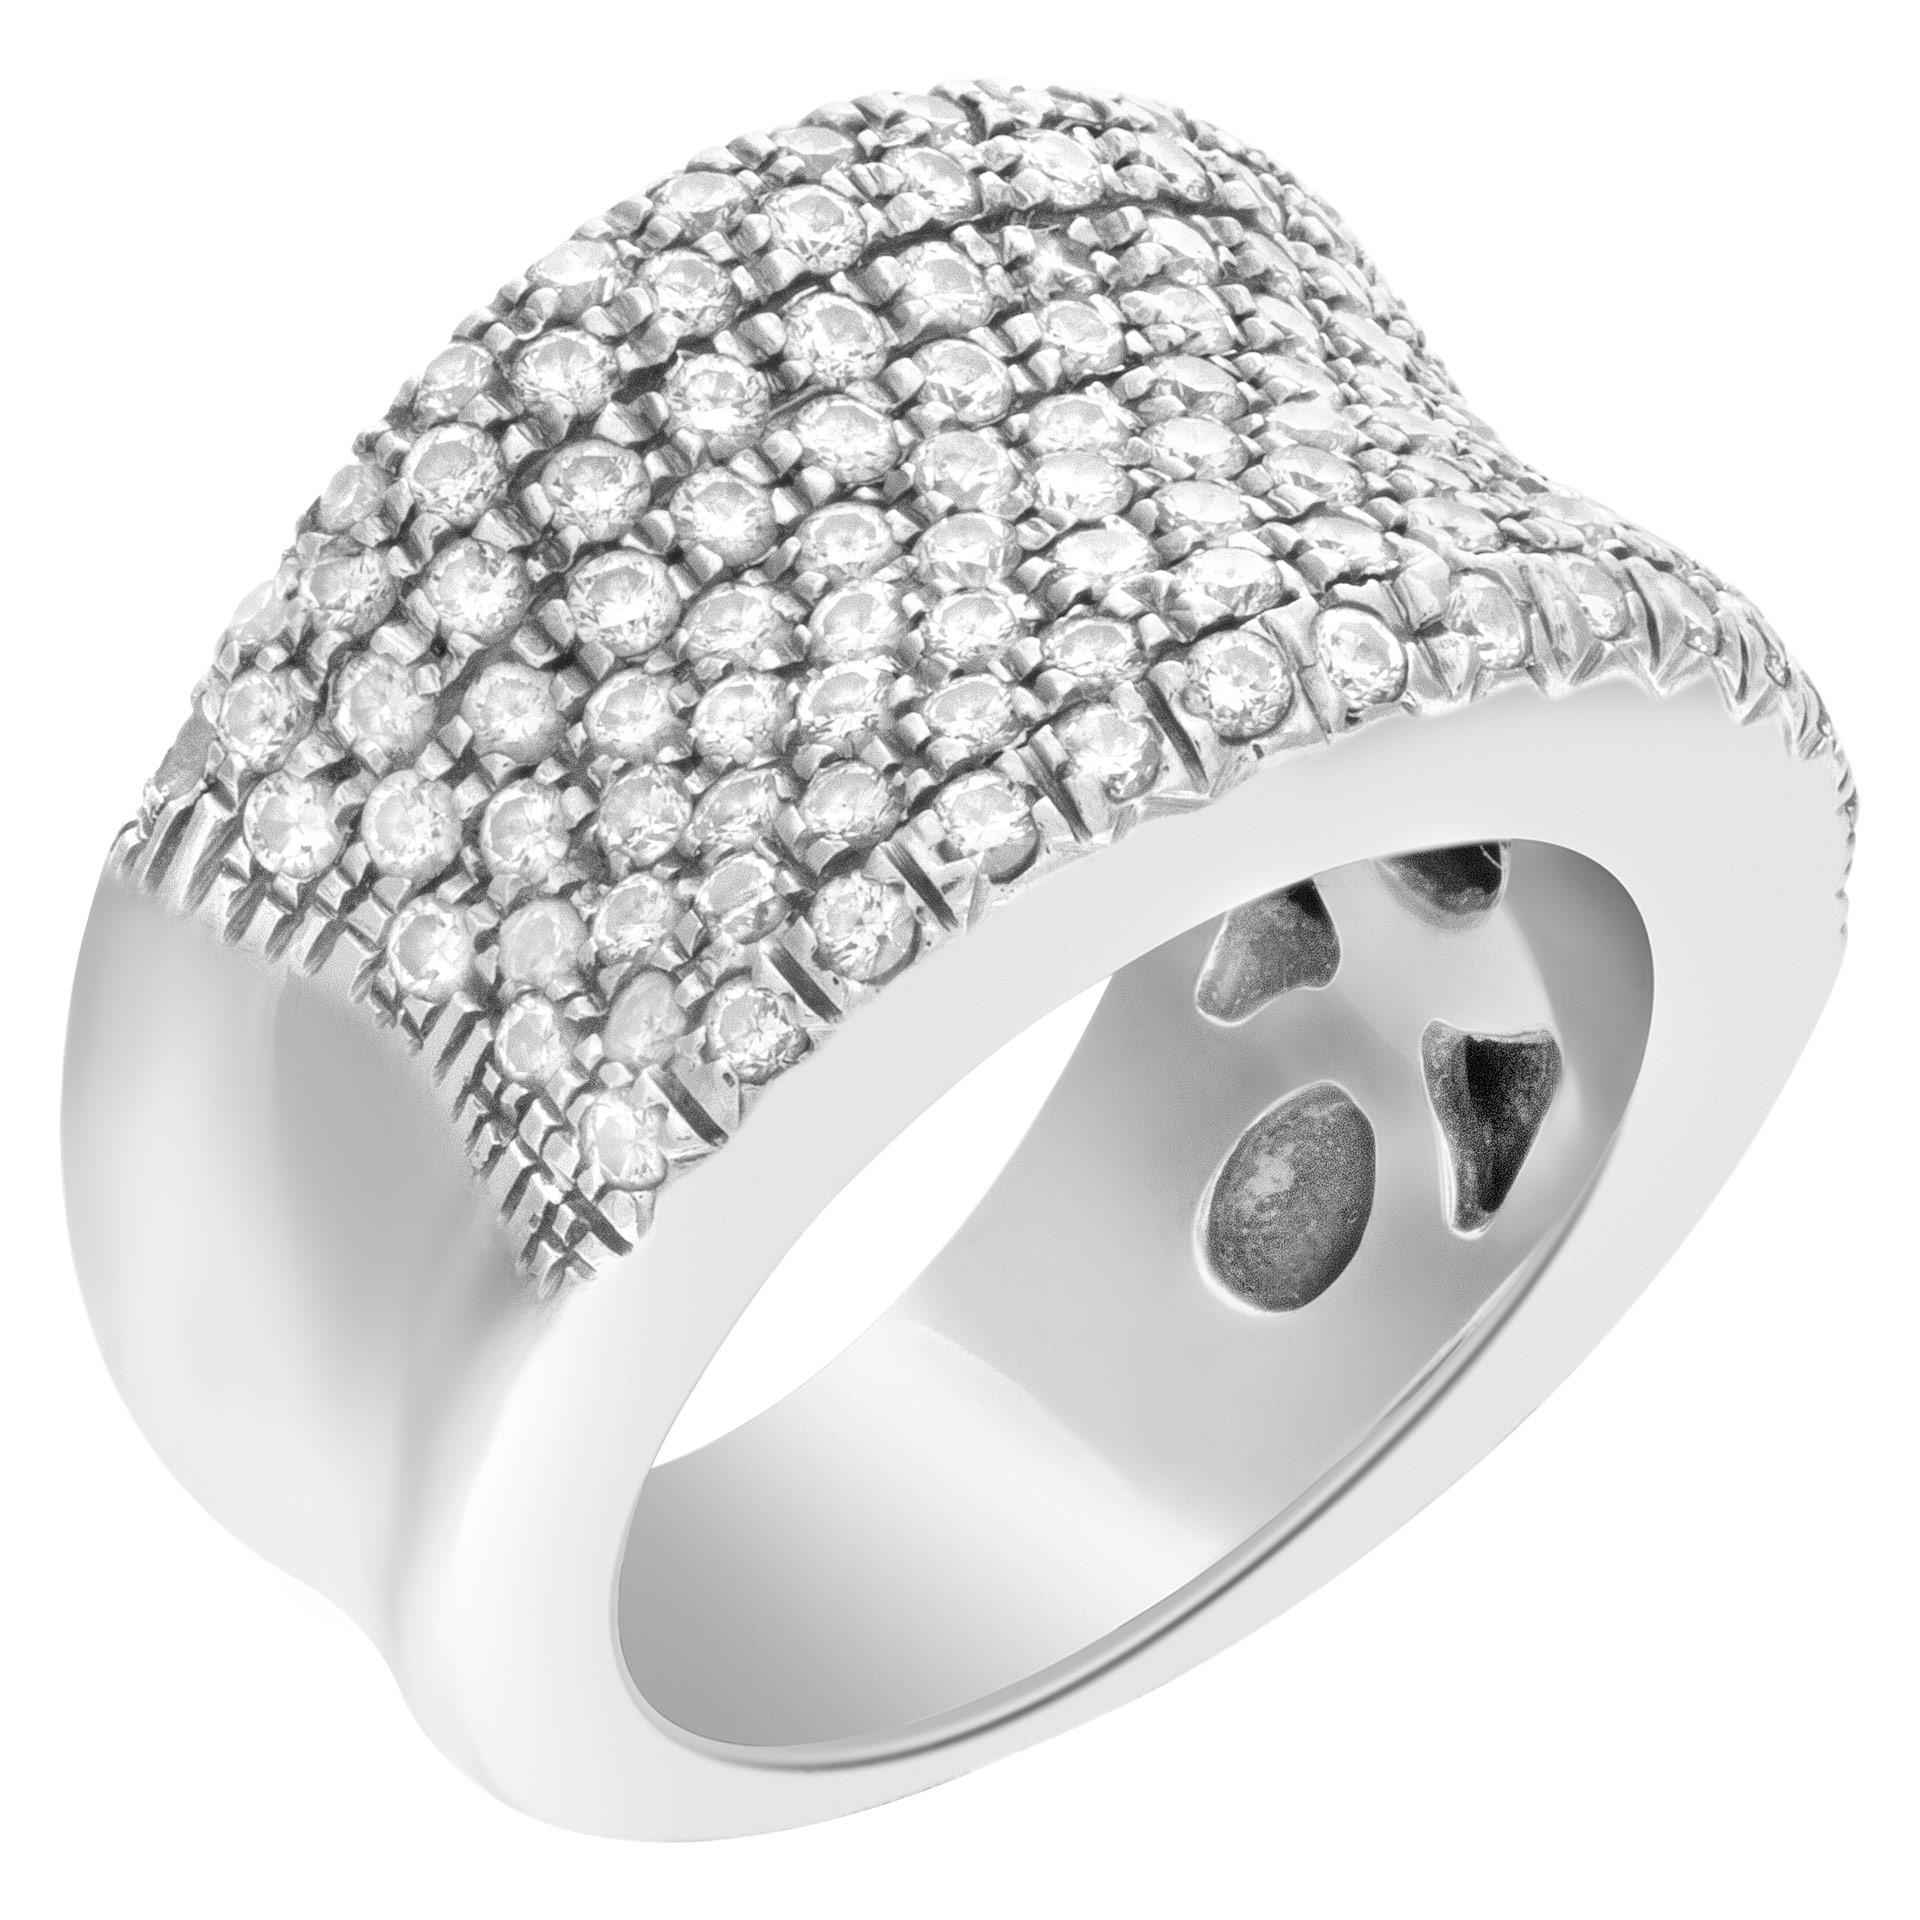 Bold wedding/anniversary band with eight rows of pave diamonds set in 18K white gold. Over 2 carats full round brilliant cut diamonds are all white and eye clean. 12mm wide. Size 6. This Diamond ring is currently size 6 and some items can be sized